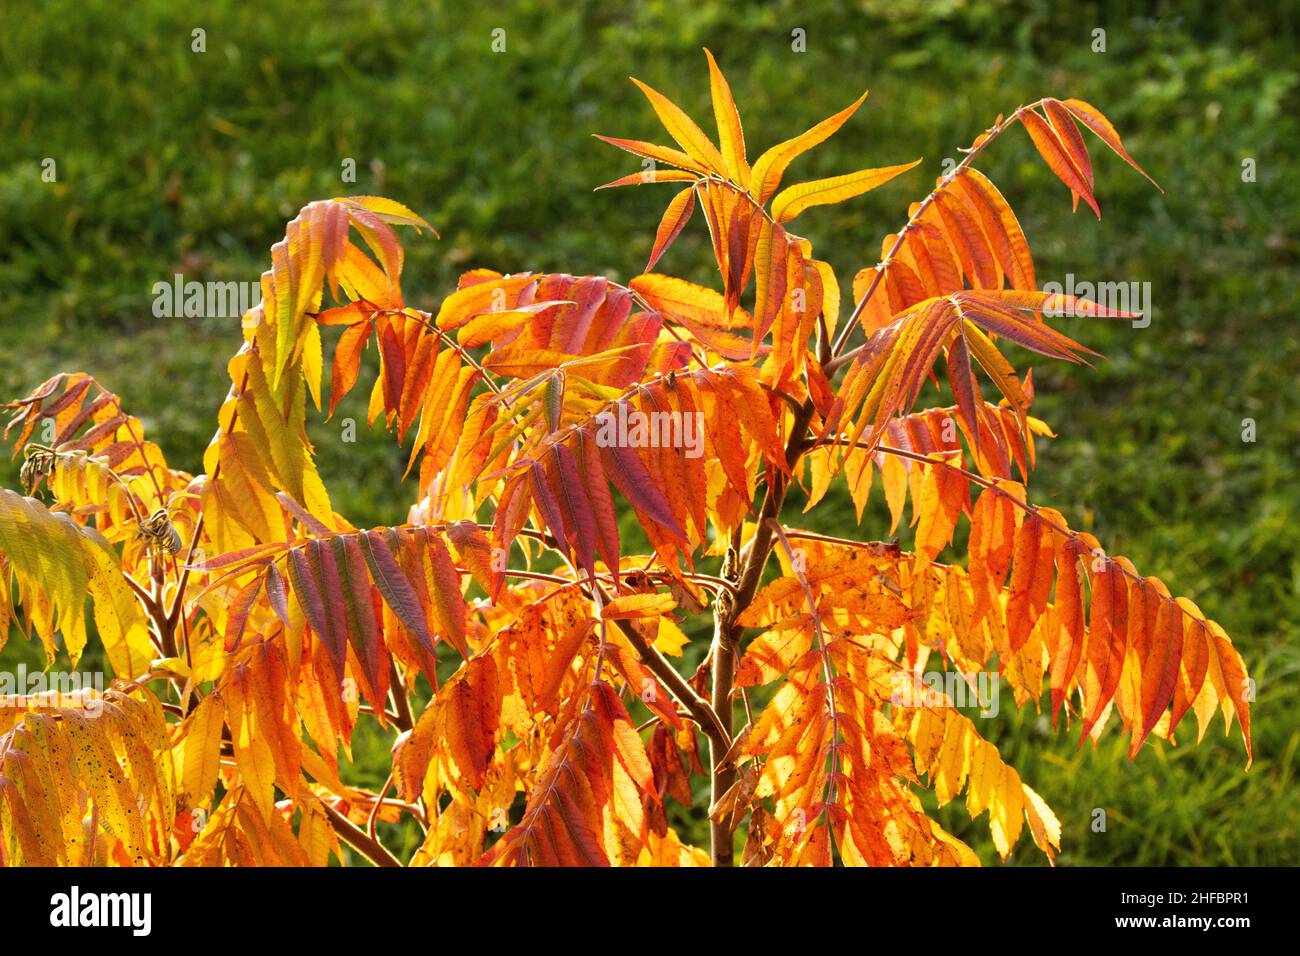 A young and colorful Staghorn sumac, Rhus typhina tree during autumn foliage in a garden Stock Photo